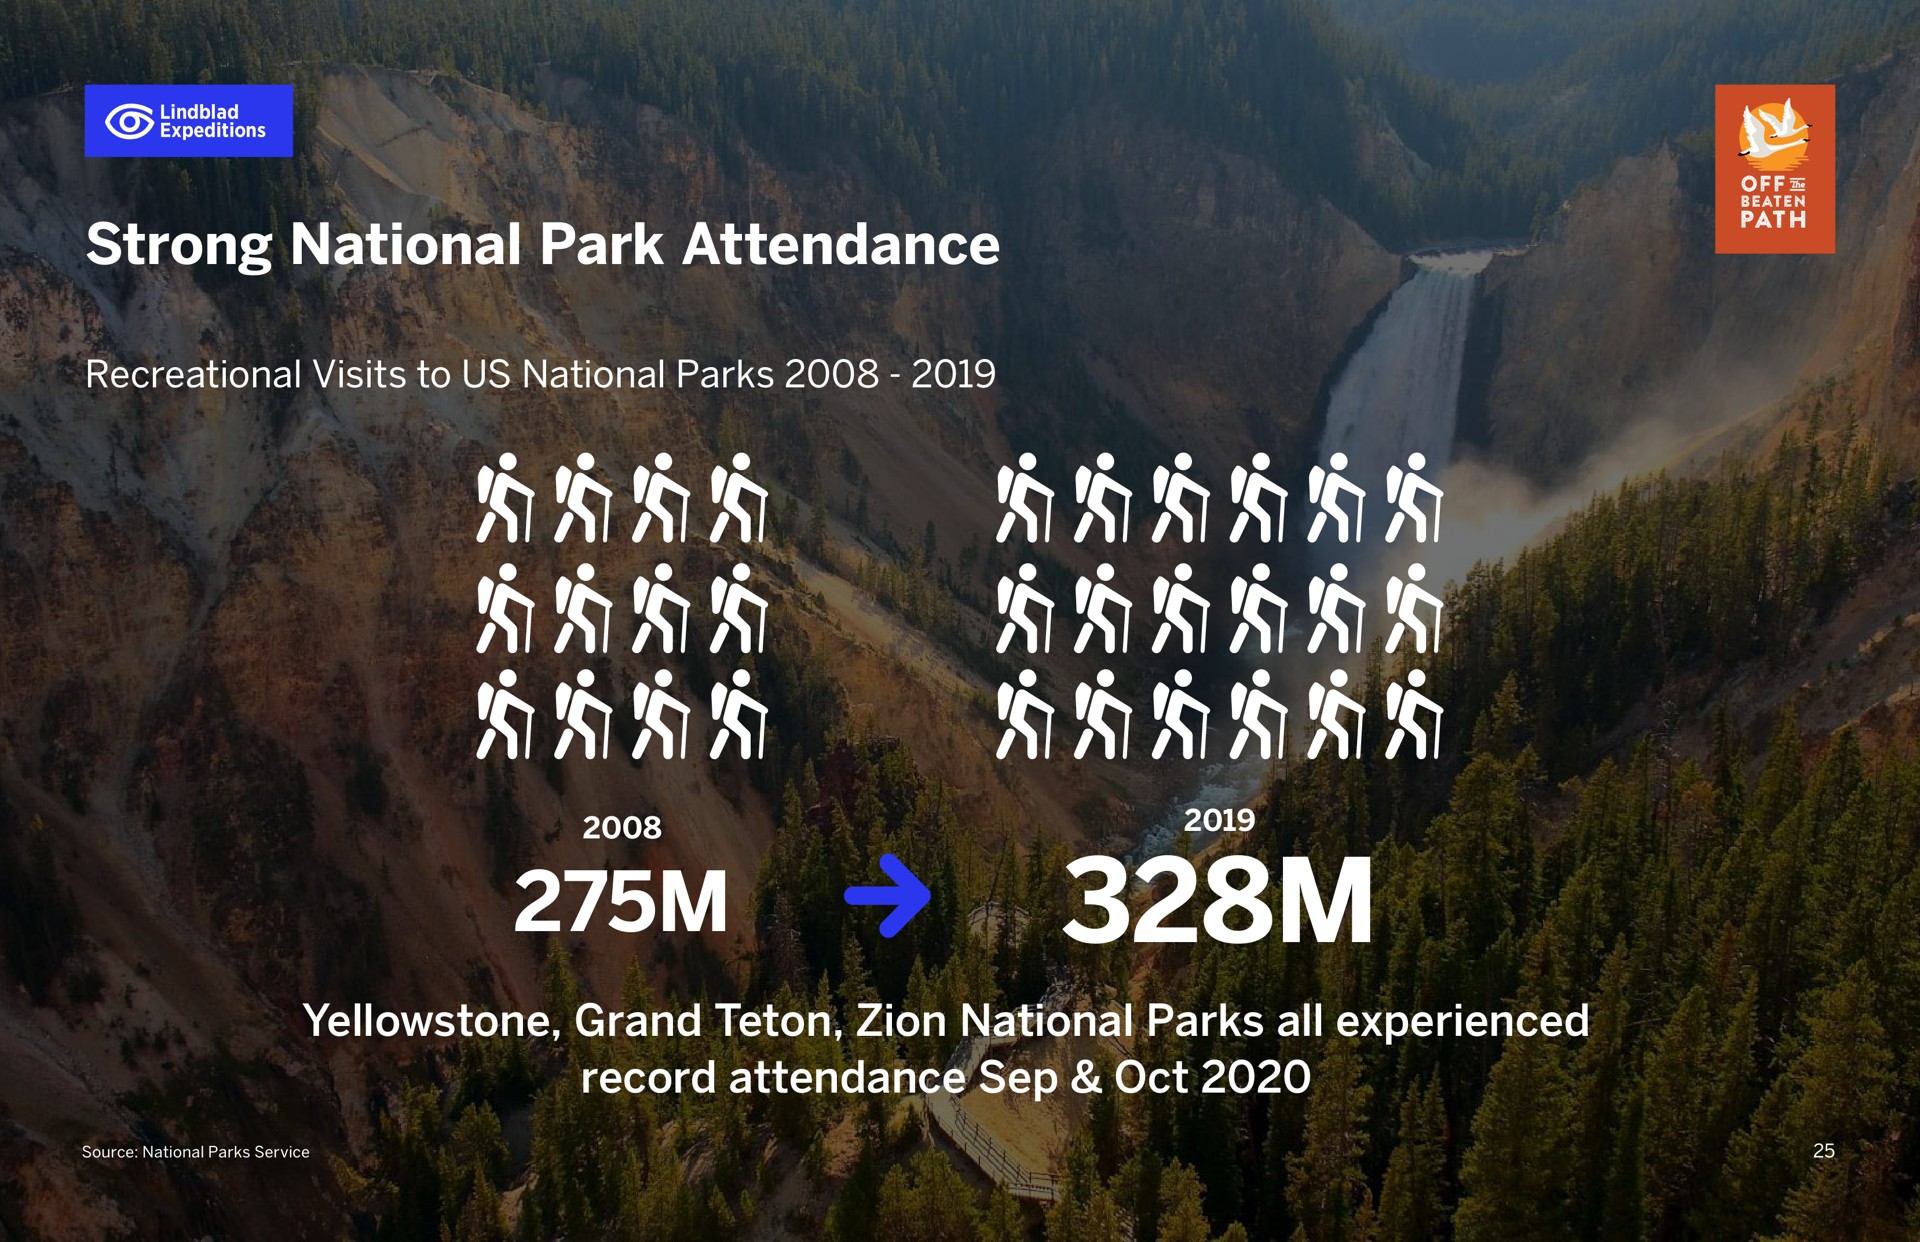 strong national park attendance grand national parks all experienced record attendance din ann | Lindblad